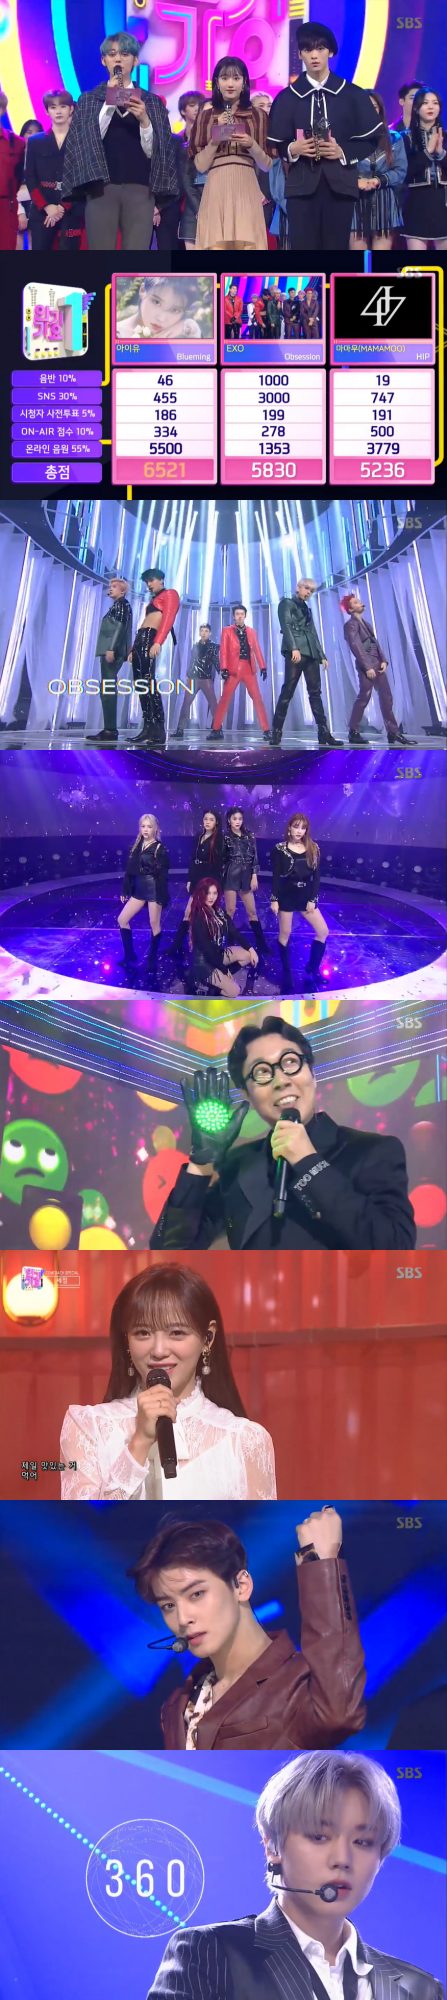 IU topped SBS Inkigayo in the second week of December; EXO, Sejeong and Park Jihoon showed off their comeback stage.In Inkigayo, which aired on the 8th, IU won the first place with a total score of 6521 without appearing on the show with Blooming, surpassing EXO and Mamamu.Back with the new song Obsession, EXO staged a comeback stage, with intense beats of music and members sexy charms drawing attention.Opsition is an addictive hip-hop dance genre that shows EXOs heap energy. The lyrics contain a doctor who wants to escape from the darkness of a terrible obsession.Sejeong and Park Jihoon, who proved their competencies as solo singers, had a comeback stage; Sejeong, who appeared in a lace see-through blouse and velvet skirt, showed off her elegant charm.Sejeongs sweet voice, which sang Tunnel, warmly melted into the hearts of those who listened to it in the cold weather.The meticulous instrumental composition and the warm vocals of Sejeong are combined to provide healing.Park Jihoon took to the stage in a striped suit and showed off her dandy charm.Park Jihoon sang 360 and drew the audiences cheers with an understated performance and dreamy voice.360 is a song that captures the pouring spotlight and Park Jihoons confident feelings about it.In addition, AOA, Space Girl, Astro, Golden Child, Kim Young-chul, Nature, Bandit, Seven Clac, Ivan, One One of the One Team, Lee Jun-young and JxR appeared on the broadcast.